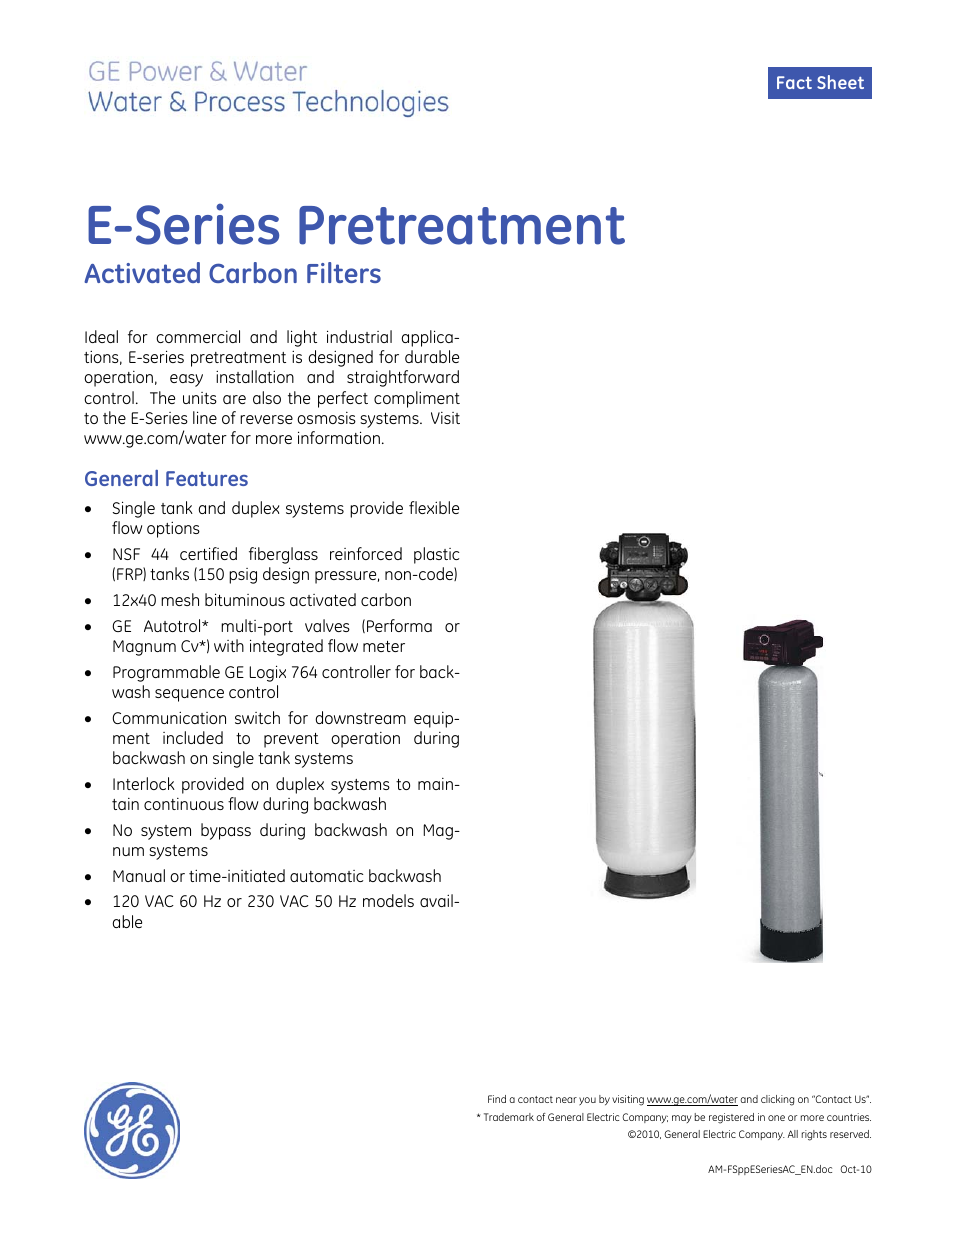 E-Series Pretreatment - Activated Carbon Filters